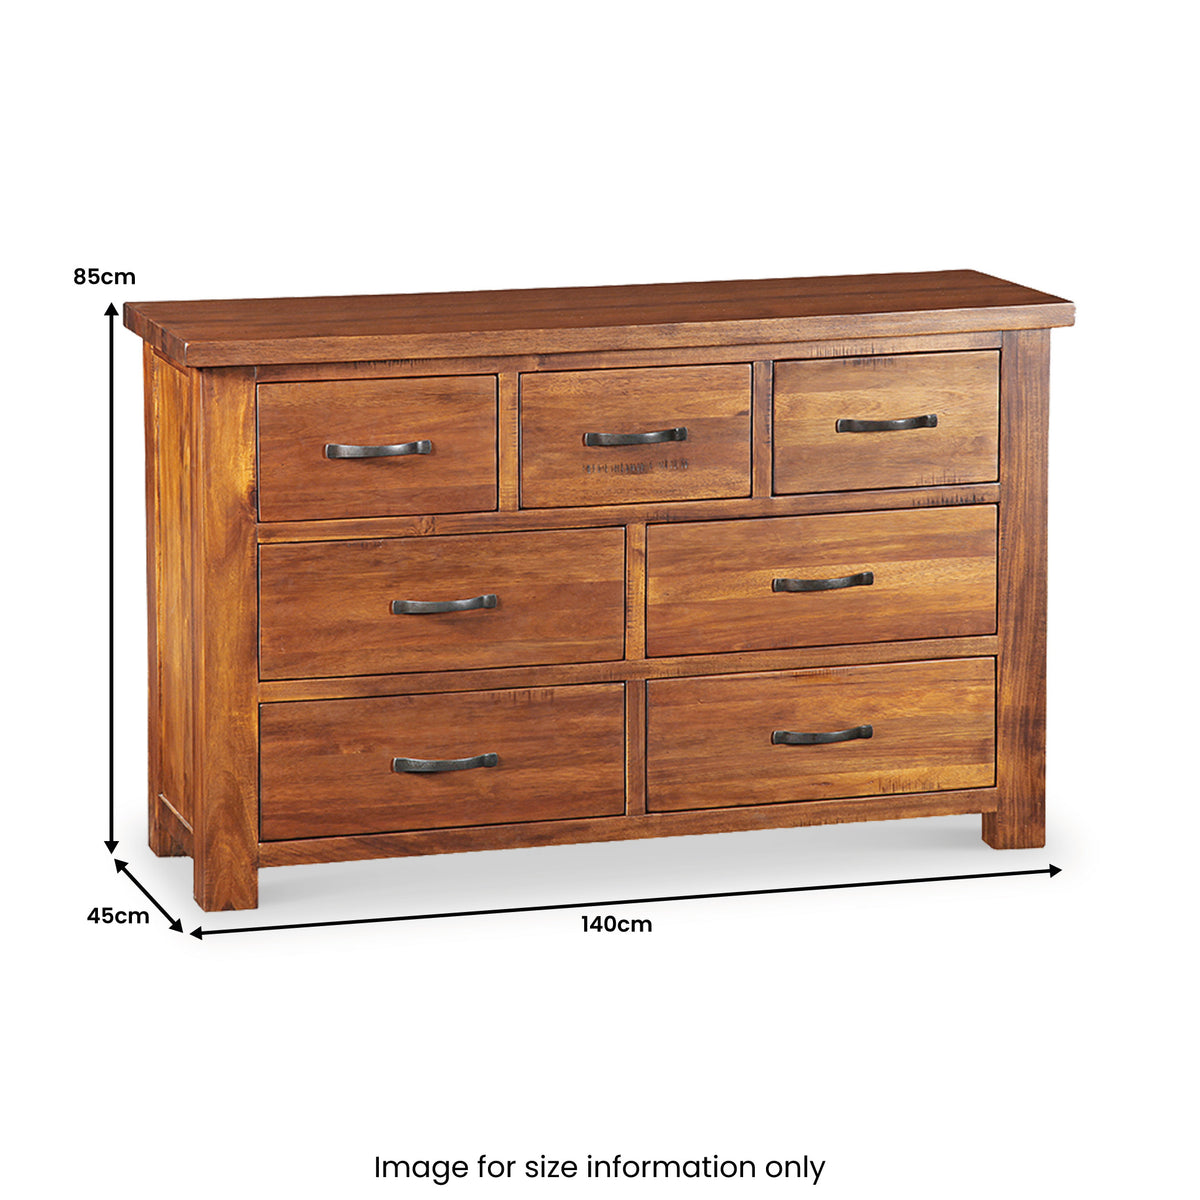 Ladock 3 Over 4 Chest of Drawers Dimensions